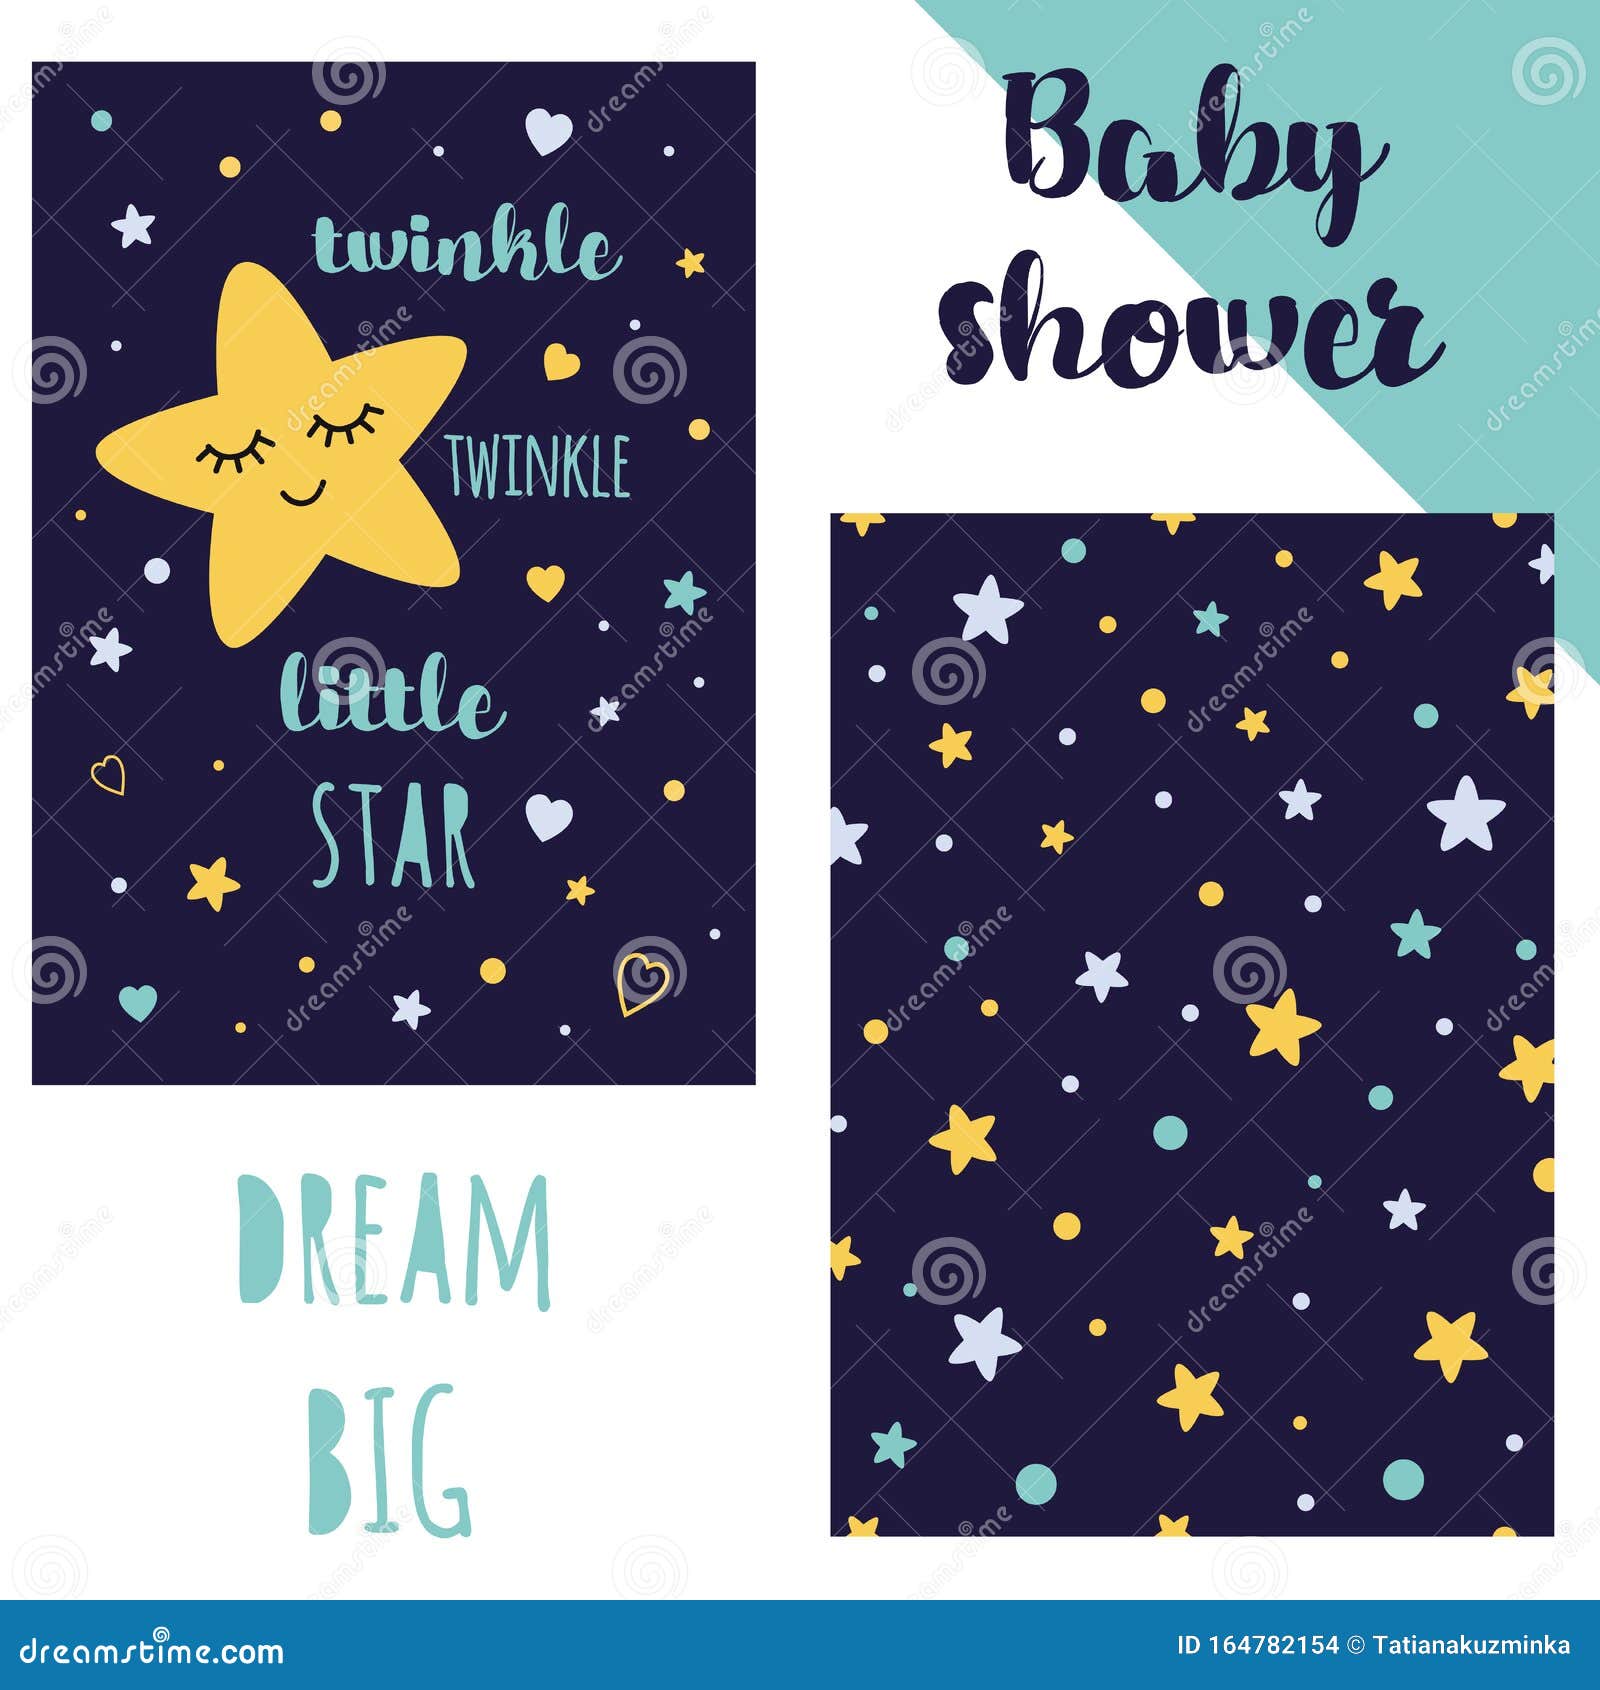 Baby Shower Invitation Template Set Background with Stars Twinkle Pharse  Stock Illustration - Illustration of invite, background: 164782154